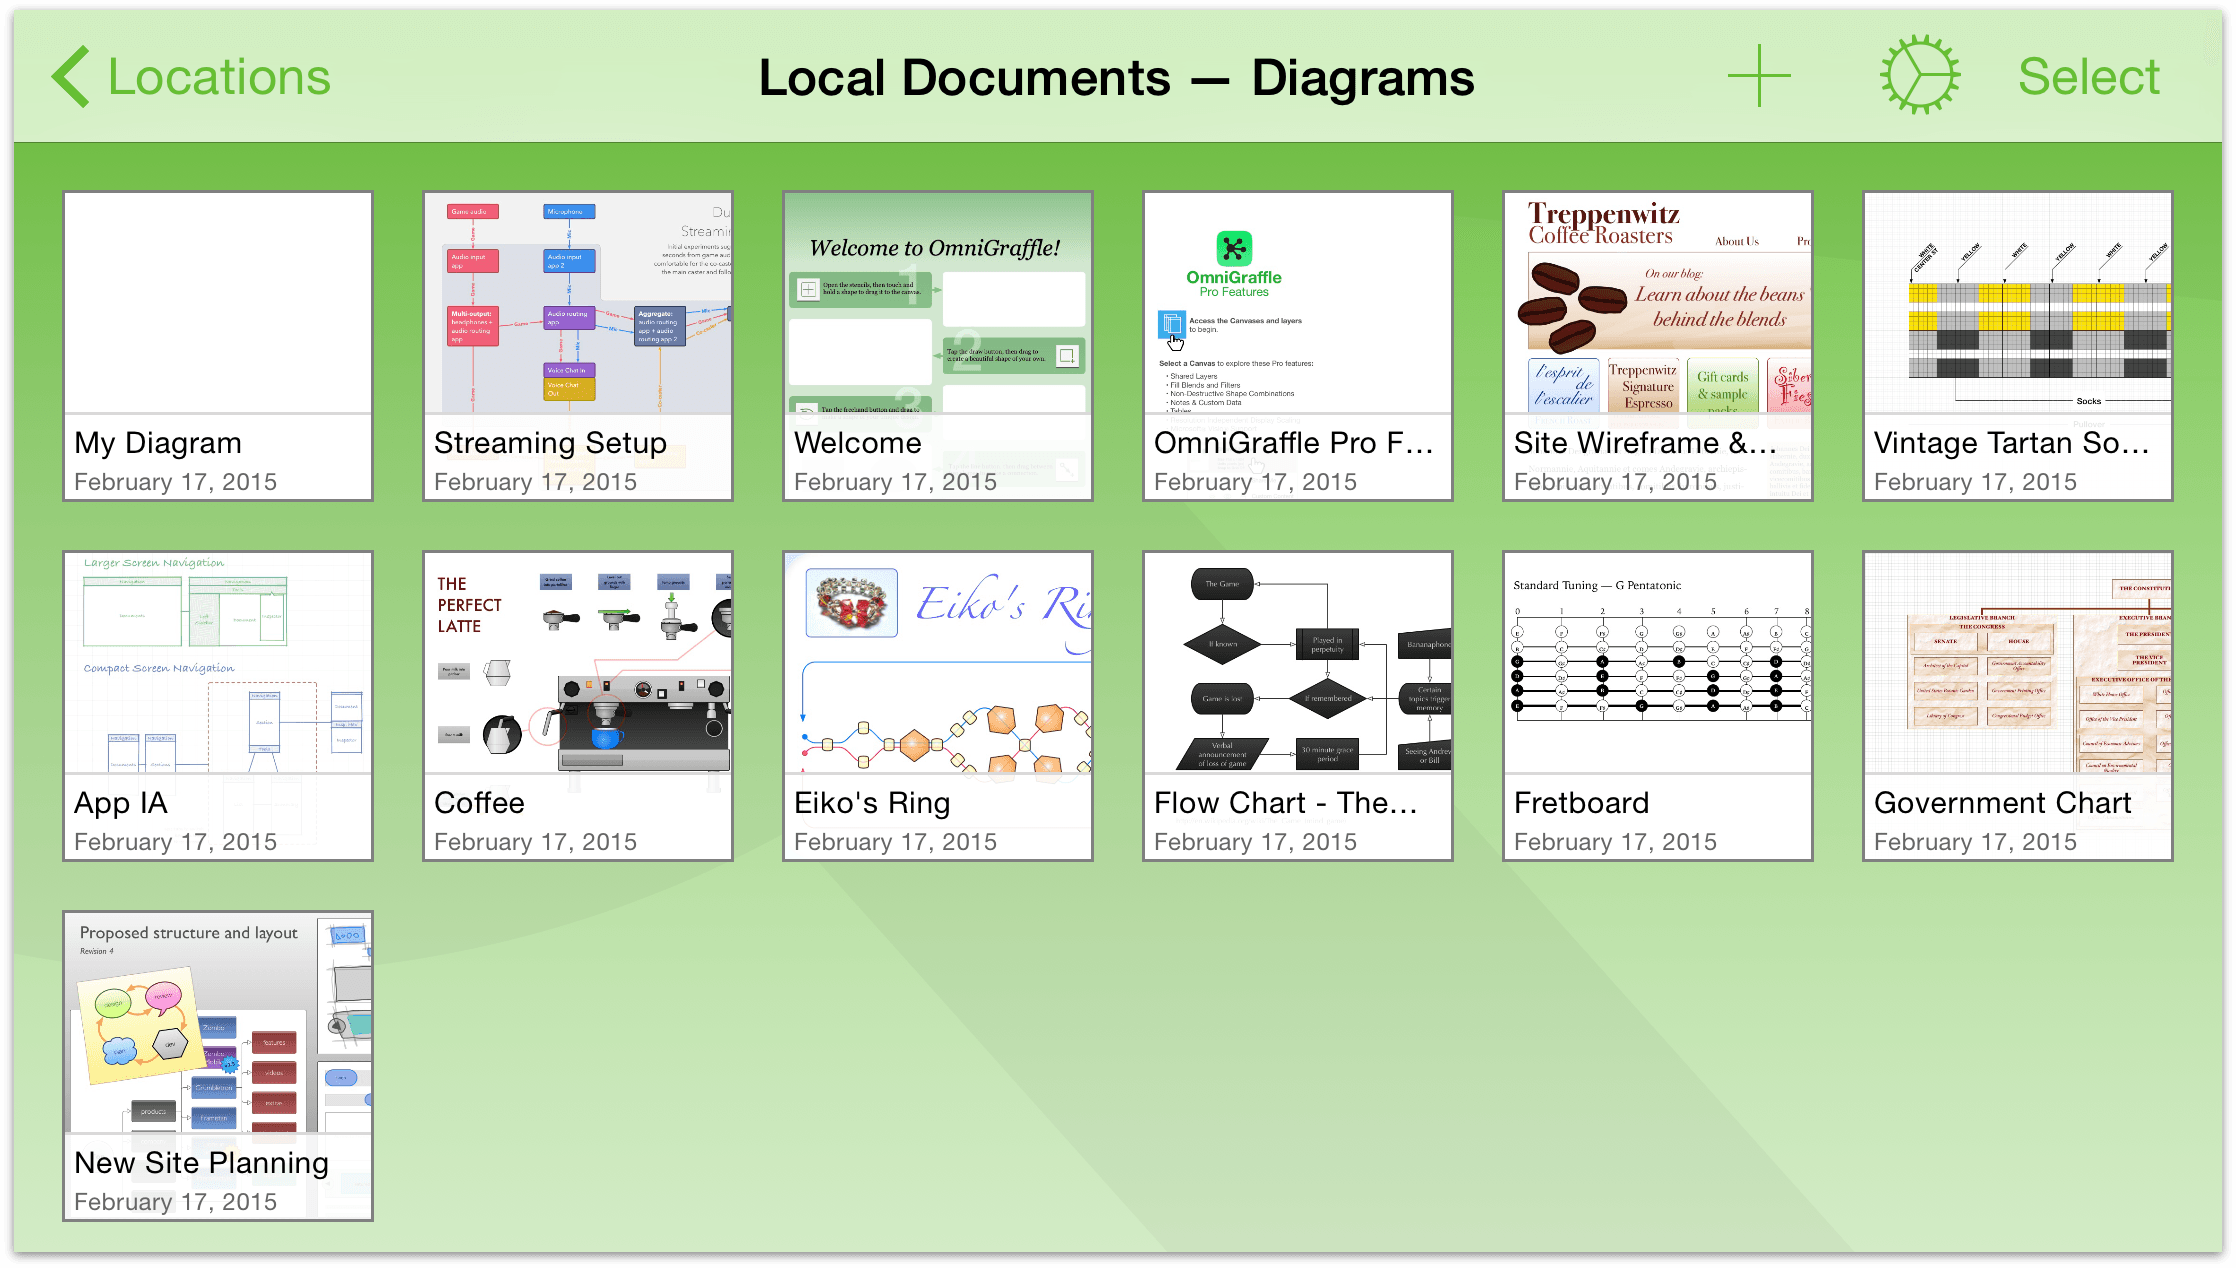 The files inside the Local Documents folder